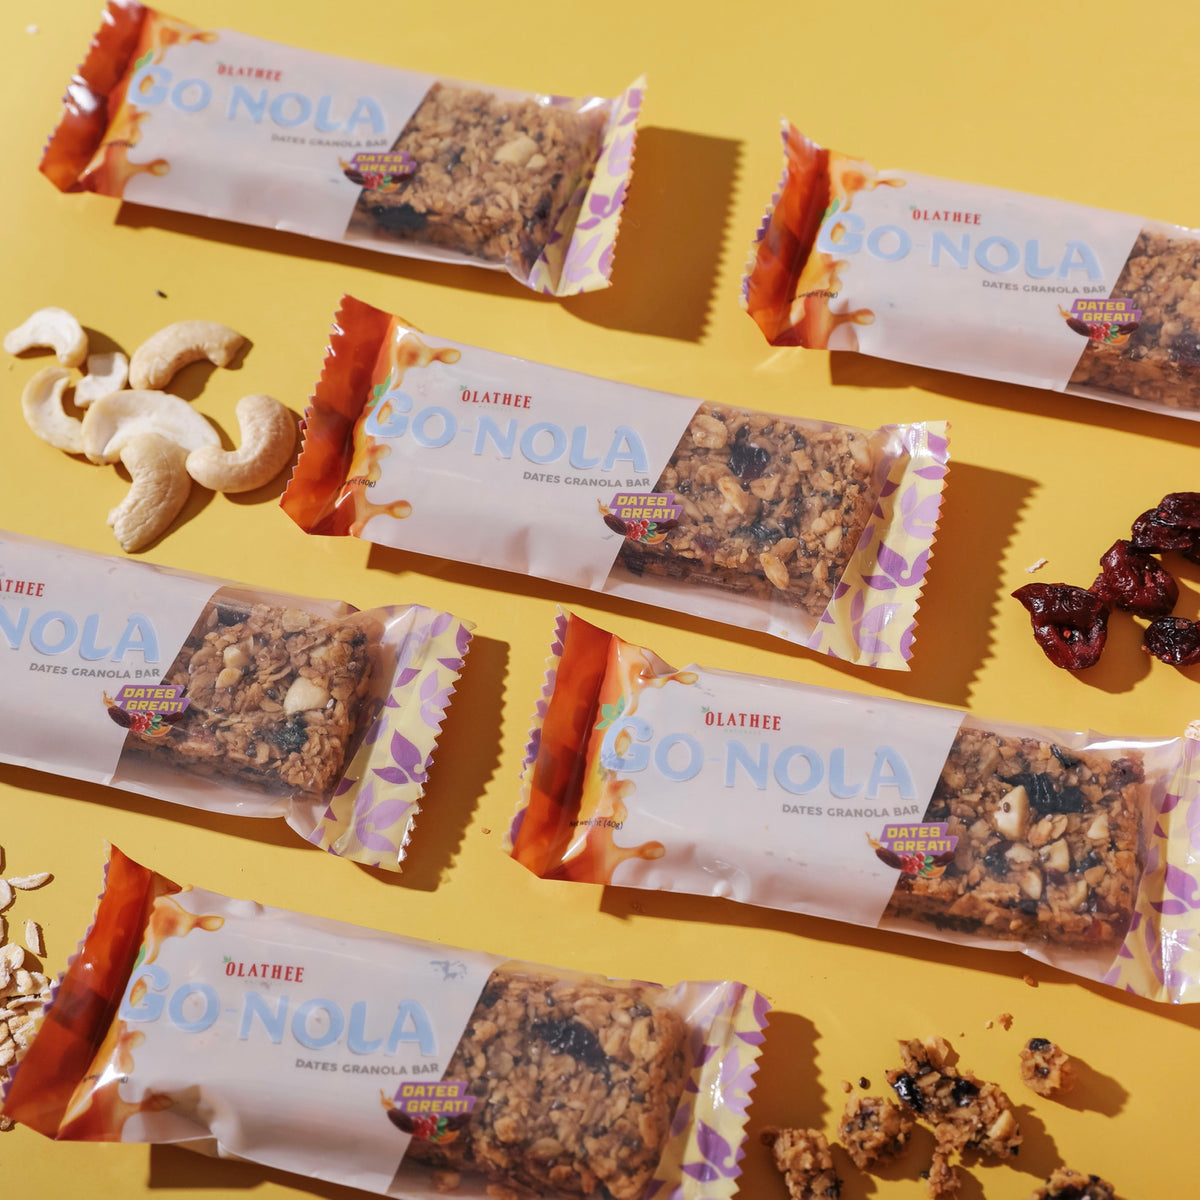 10.10 [SAVE MORE] GO-NOLA Dates Great (7 Bars/280g)